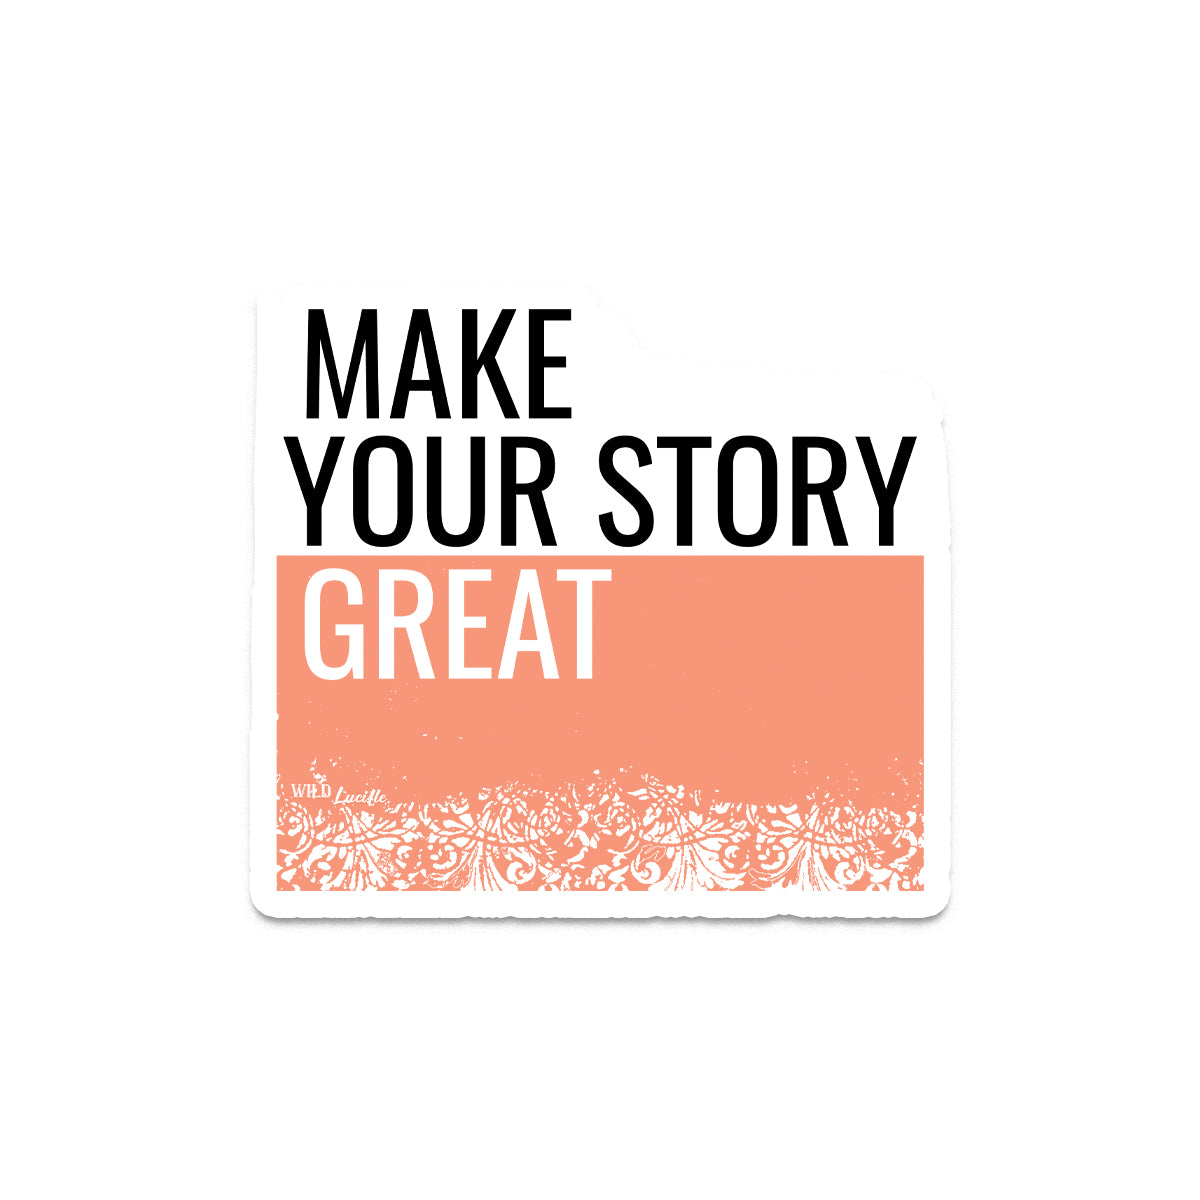 Make Your Story Great - Inspirational Vinyl Sticker Decal